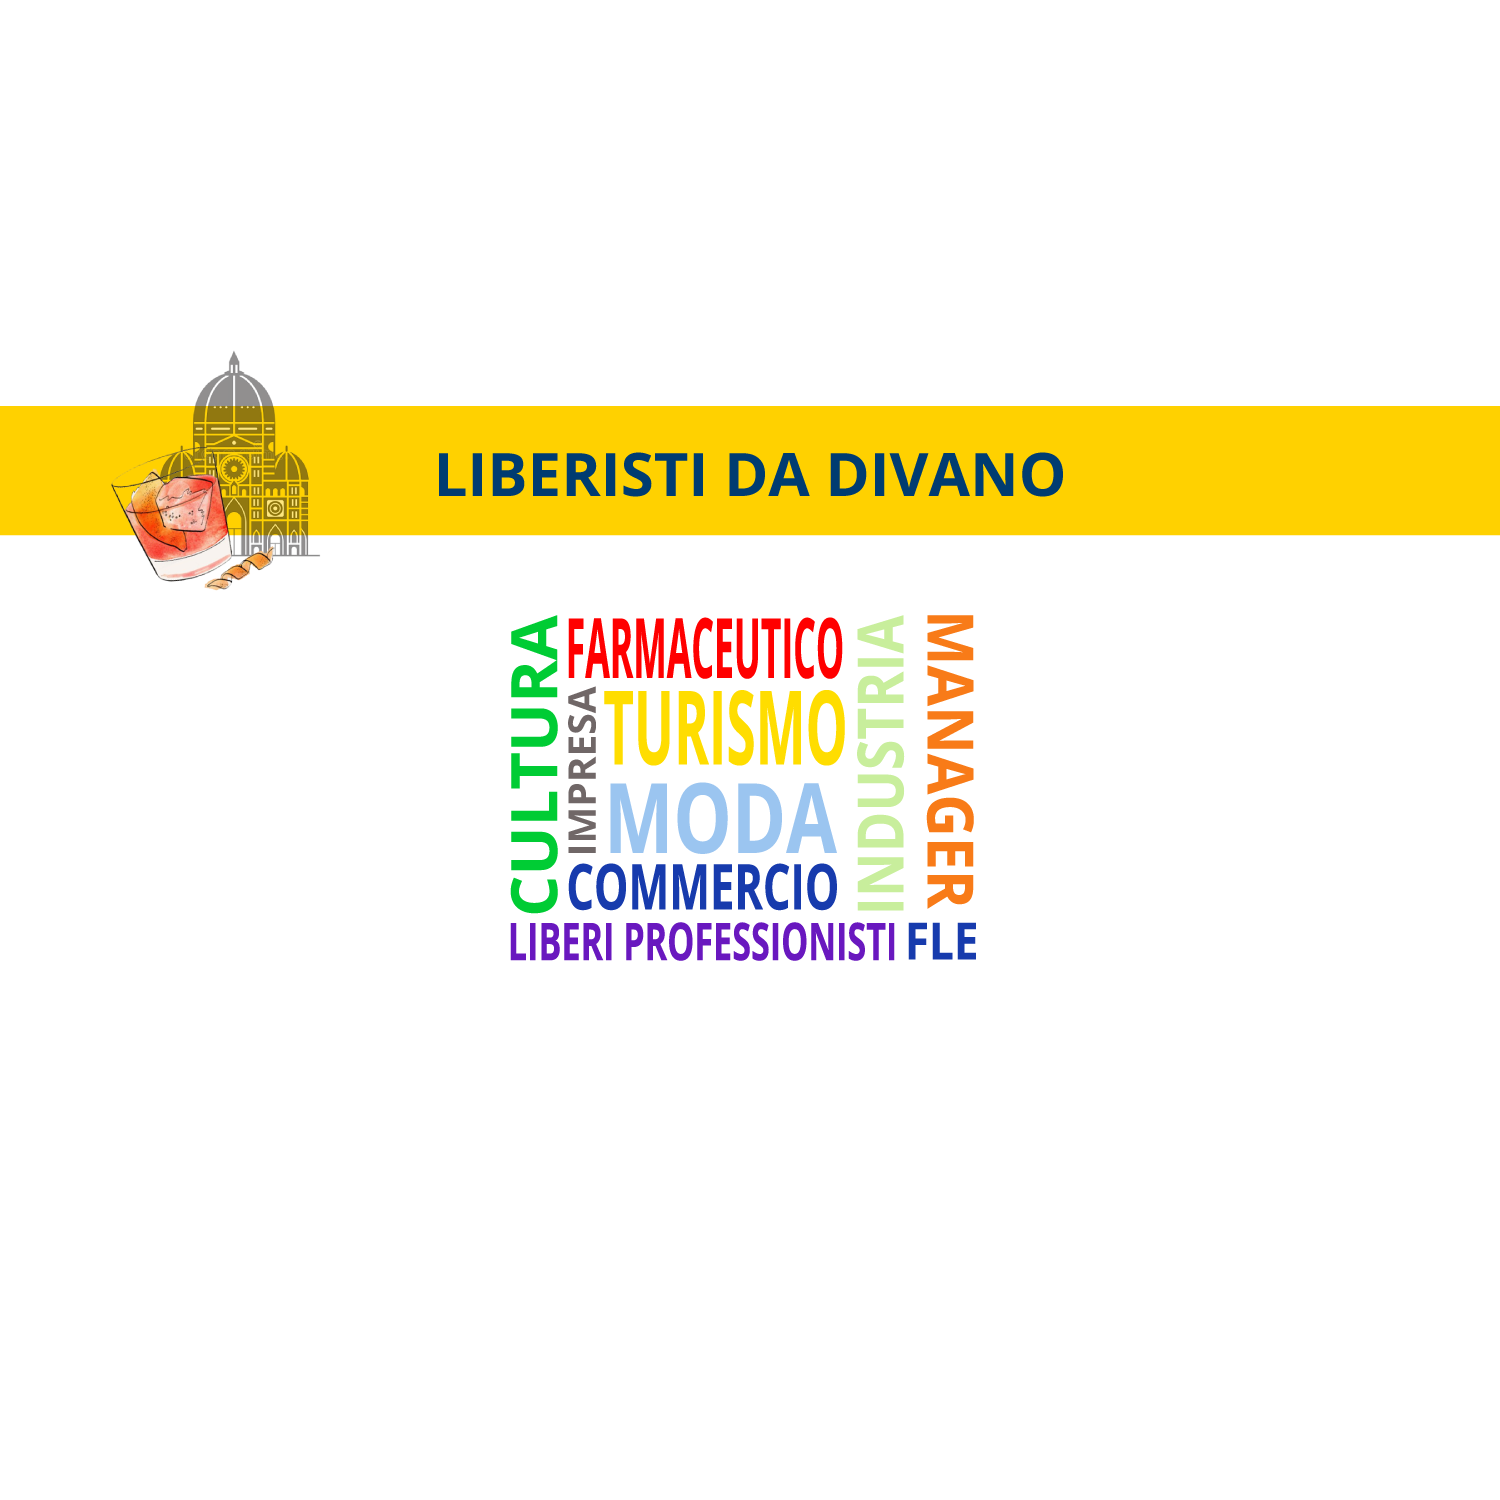 “Couch liberals”: our President presents the initiative carried out by the Florentine section of the Luigi Einaudi Foundation